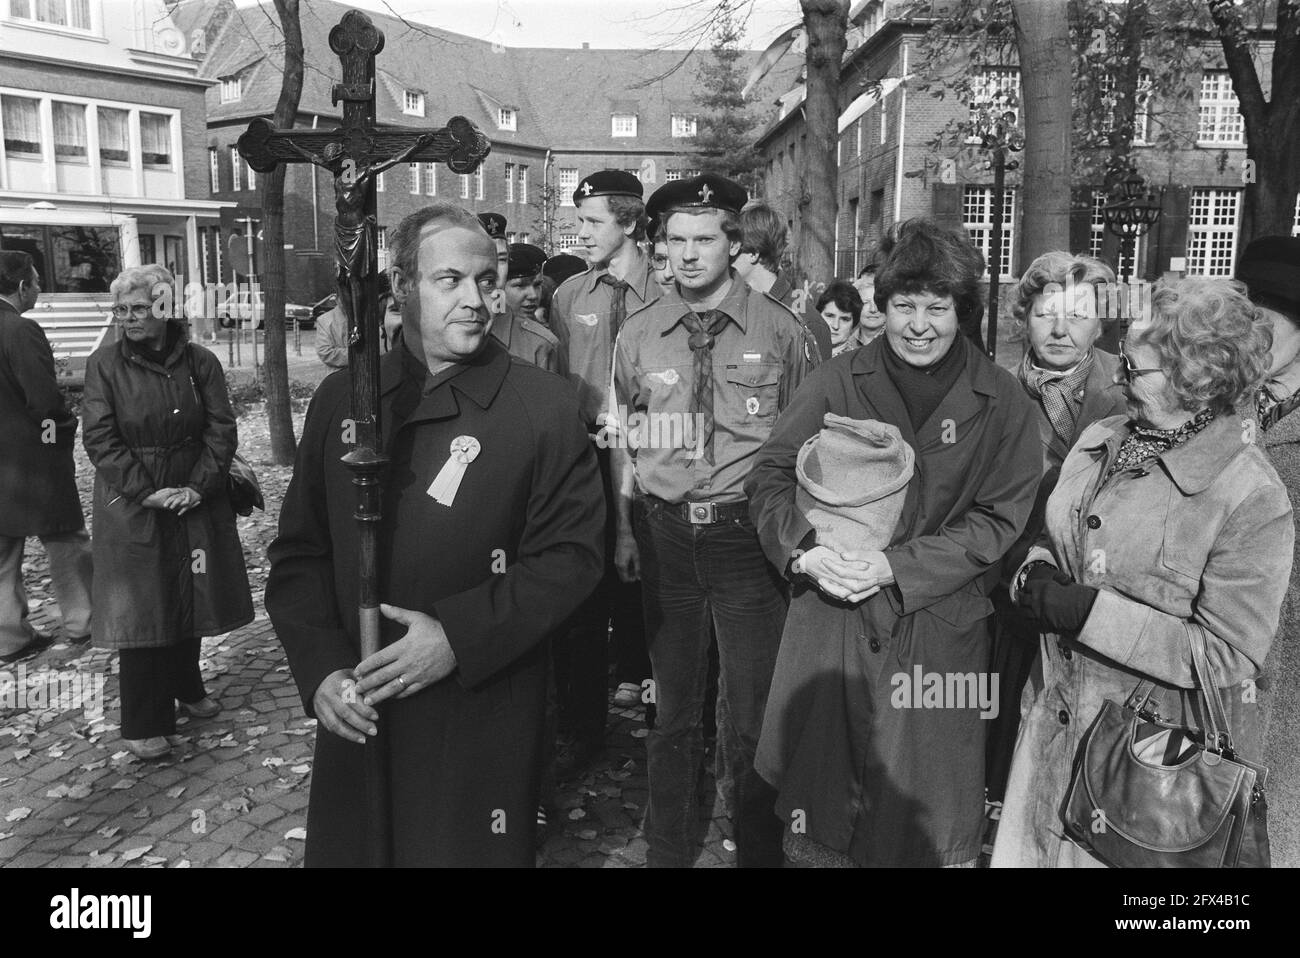 Participants in the procession, October 31, 1982, pilgrimages, pilgrims, places of pilgrimage, crosses, processions, The Netherlands, 20th century press agency photo, news to remember, documentary, historic photography 1945-1990, visual stories, human history of the Twentieth Century, capturing moments in time Stock Photo